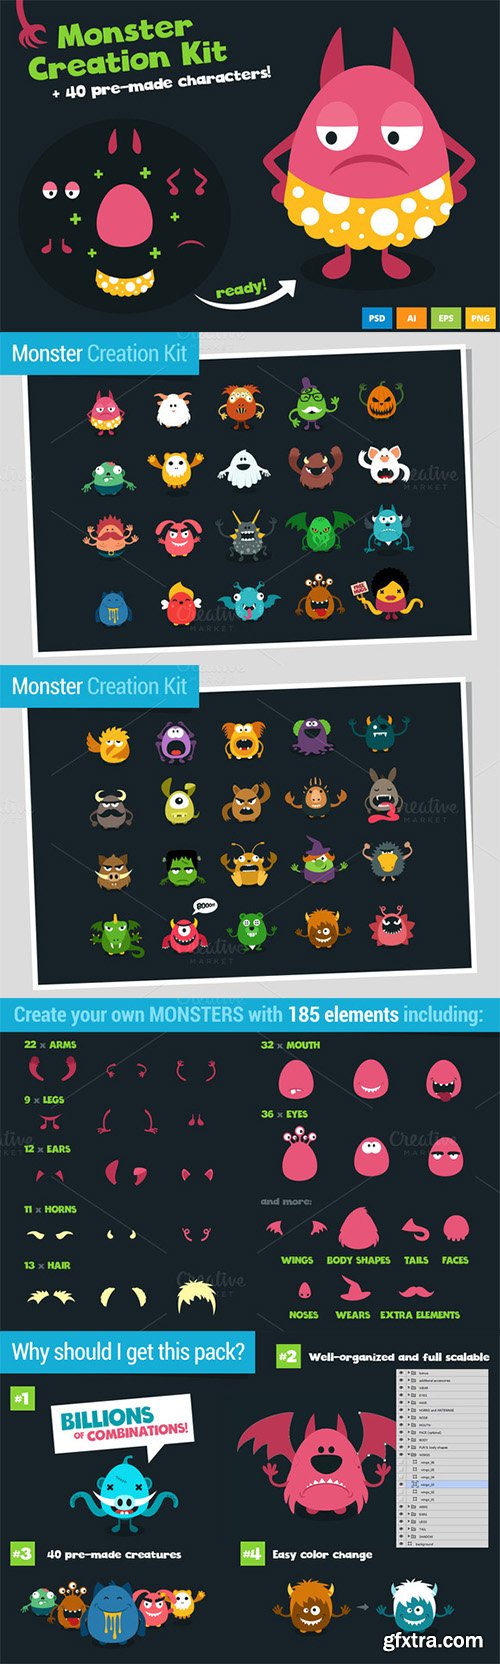 CM Monster Creation Kit with Large Pack 184154